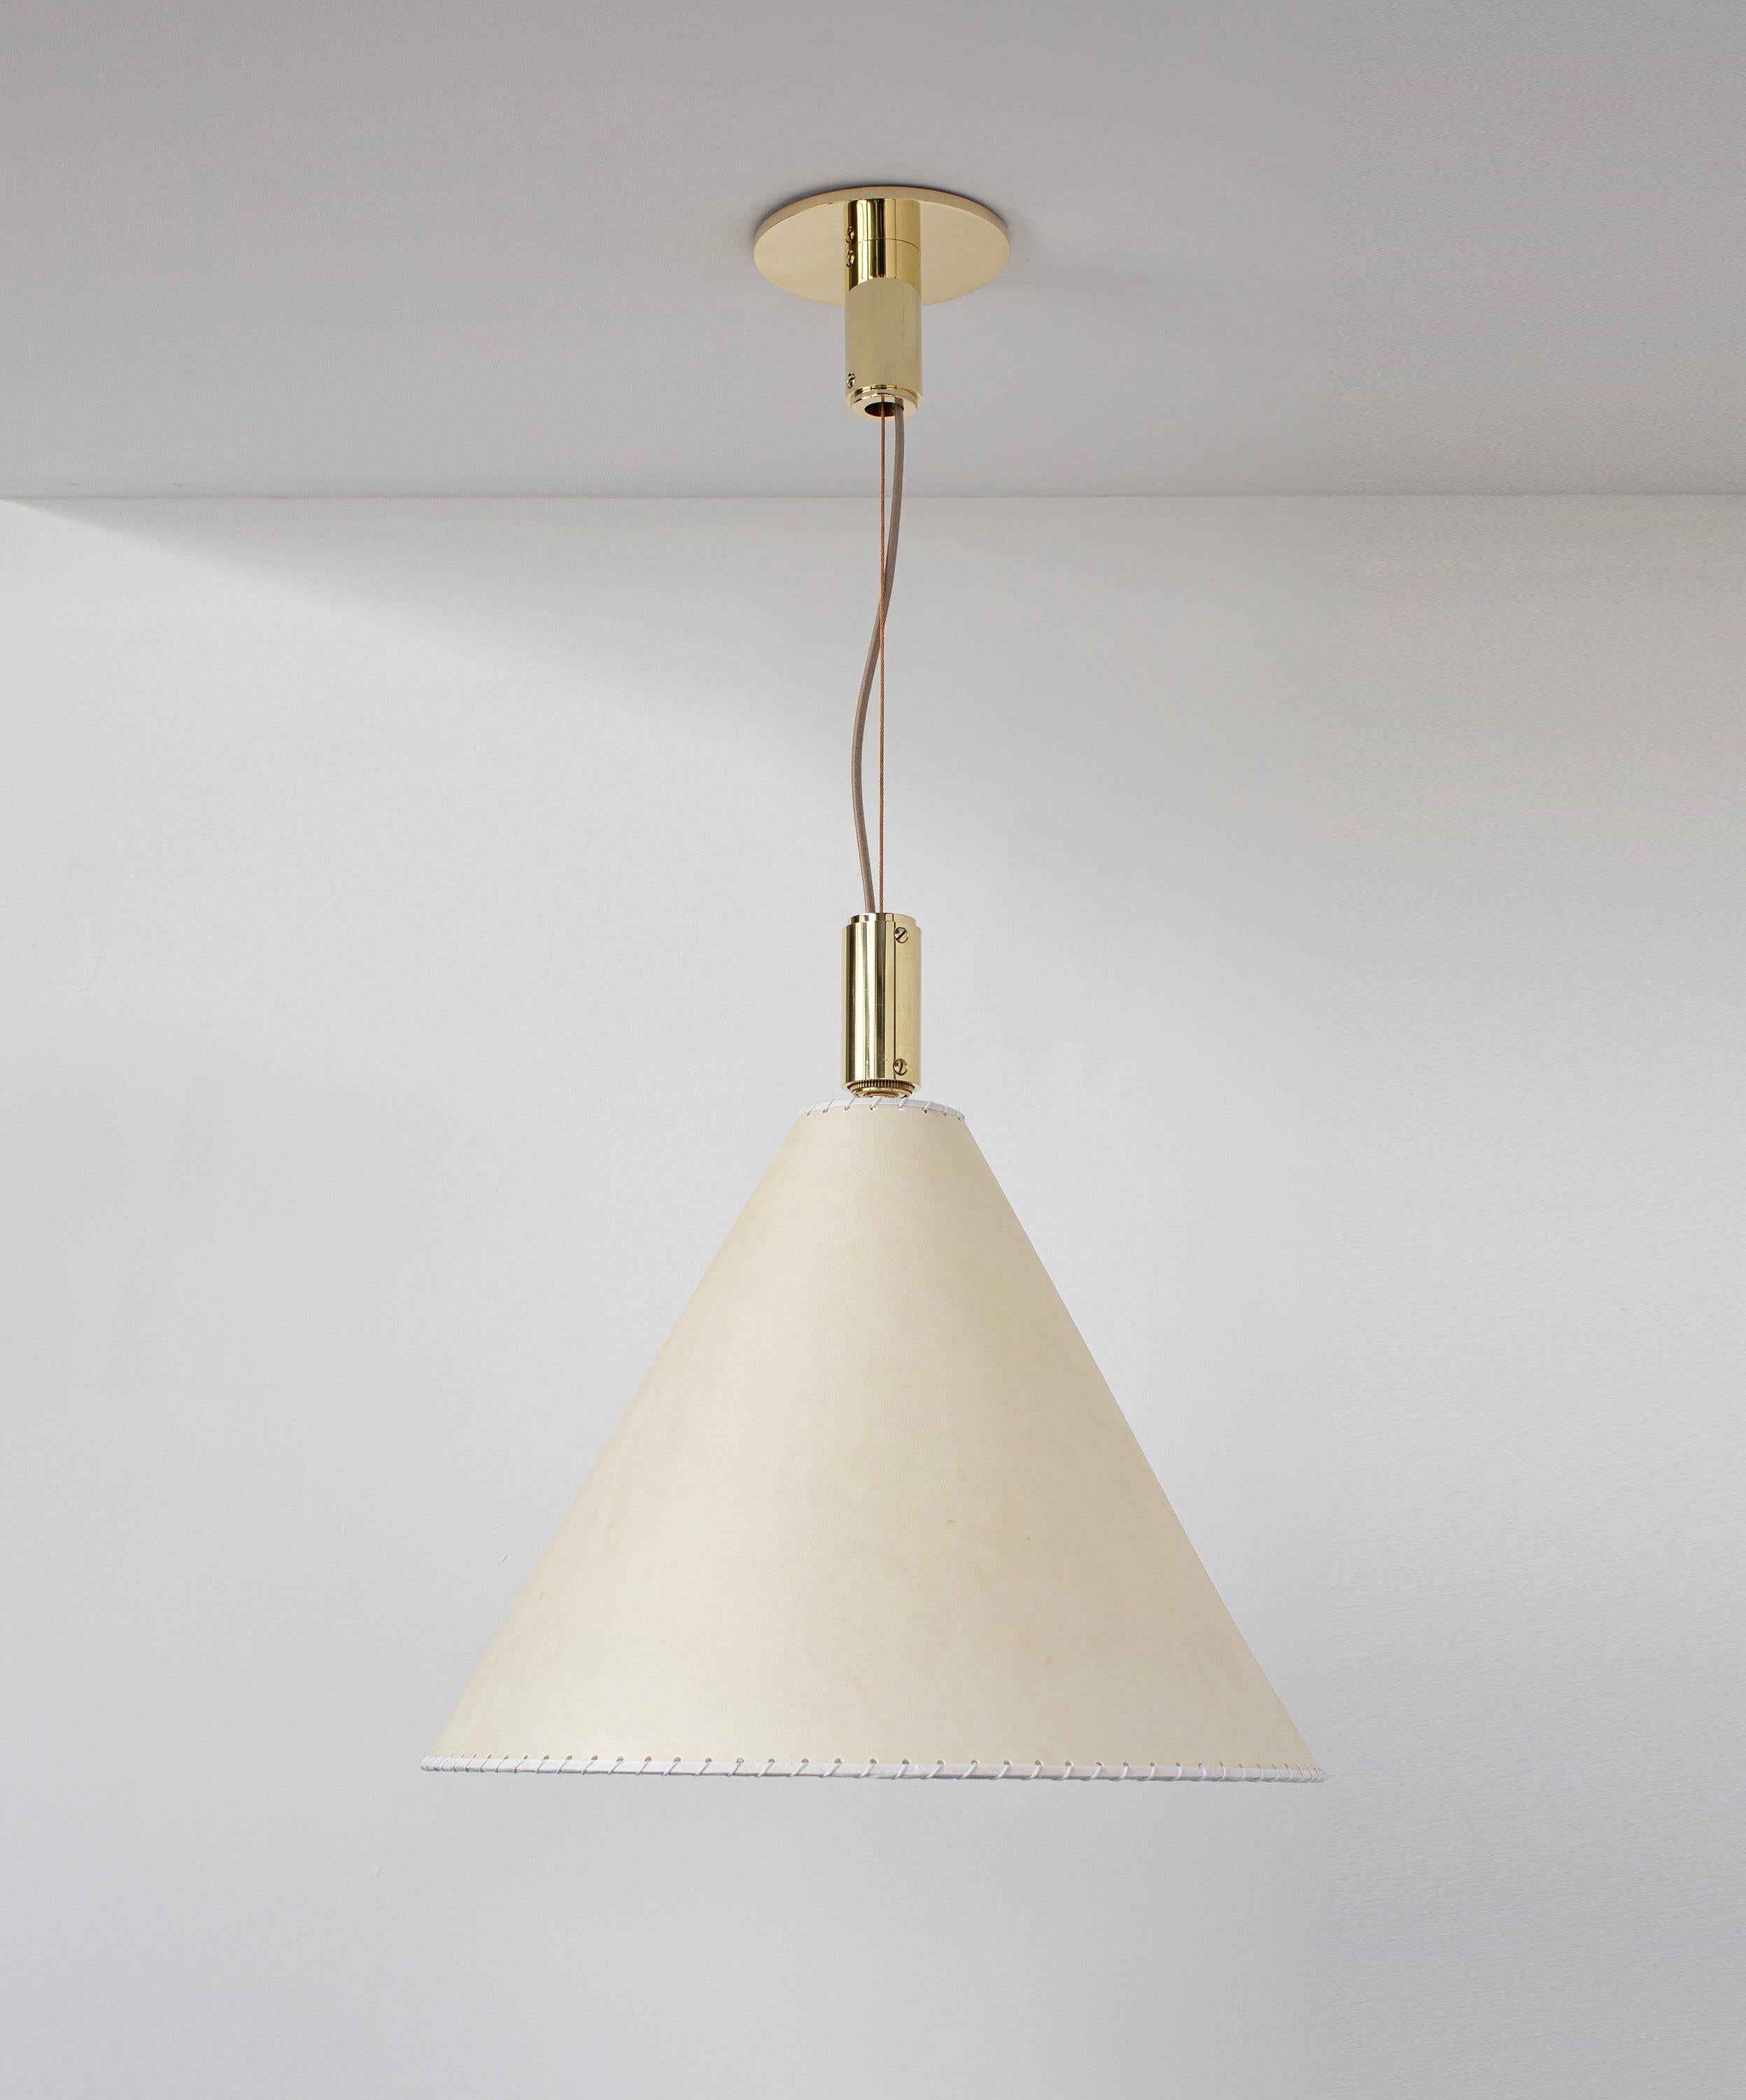 Bauhaus Series 02 Pendant, Polished Unlacquered Brass, Large Goatskin Parchment Shade For Sale